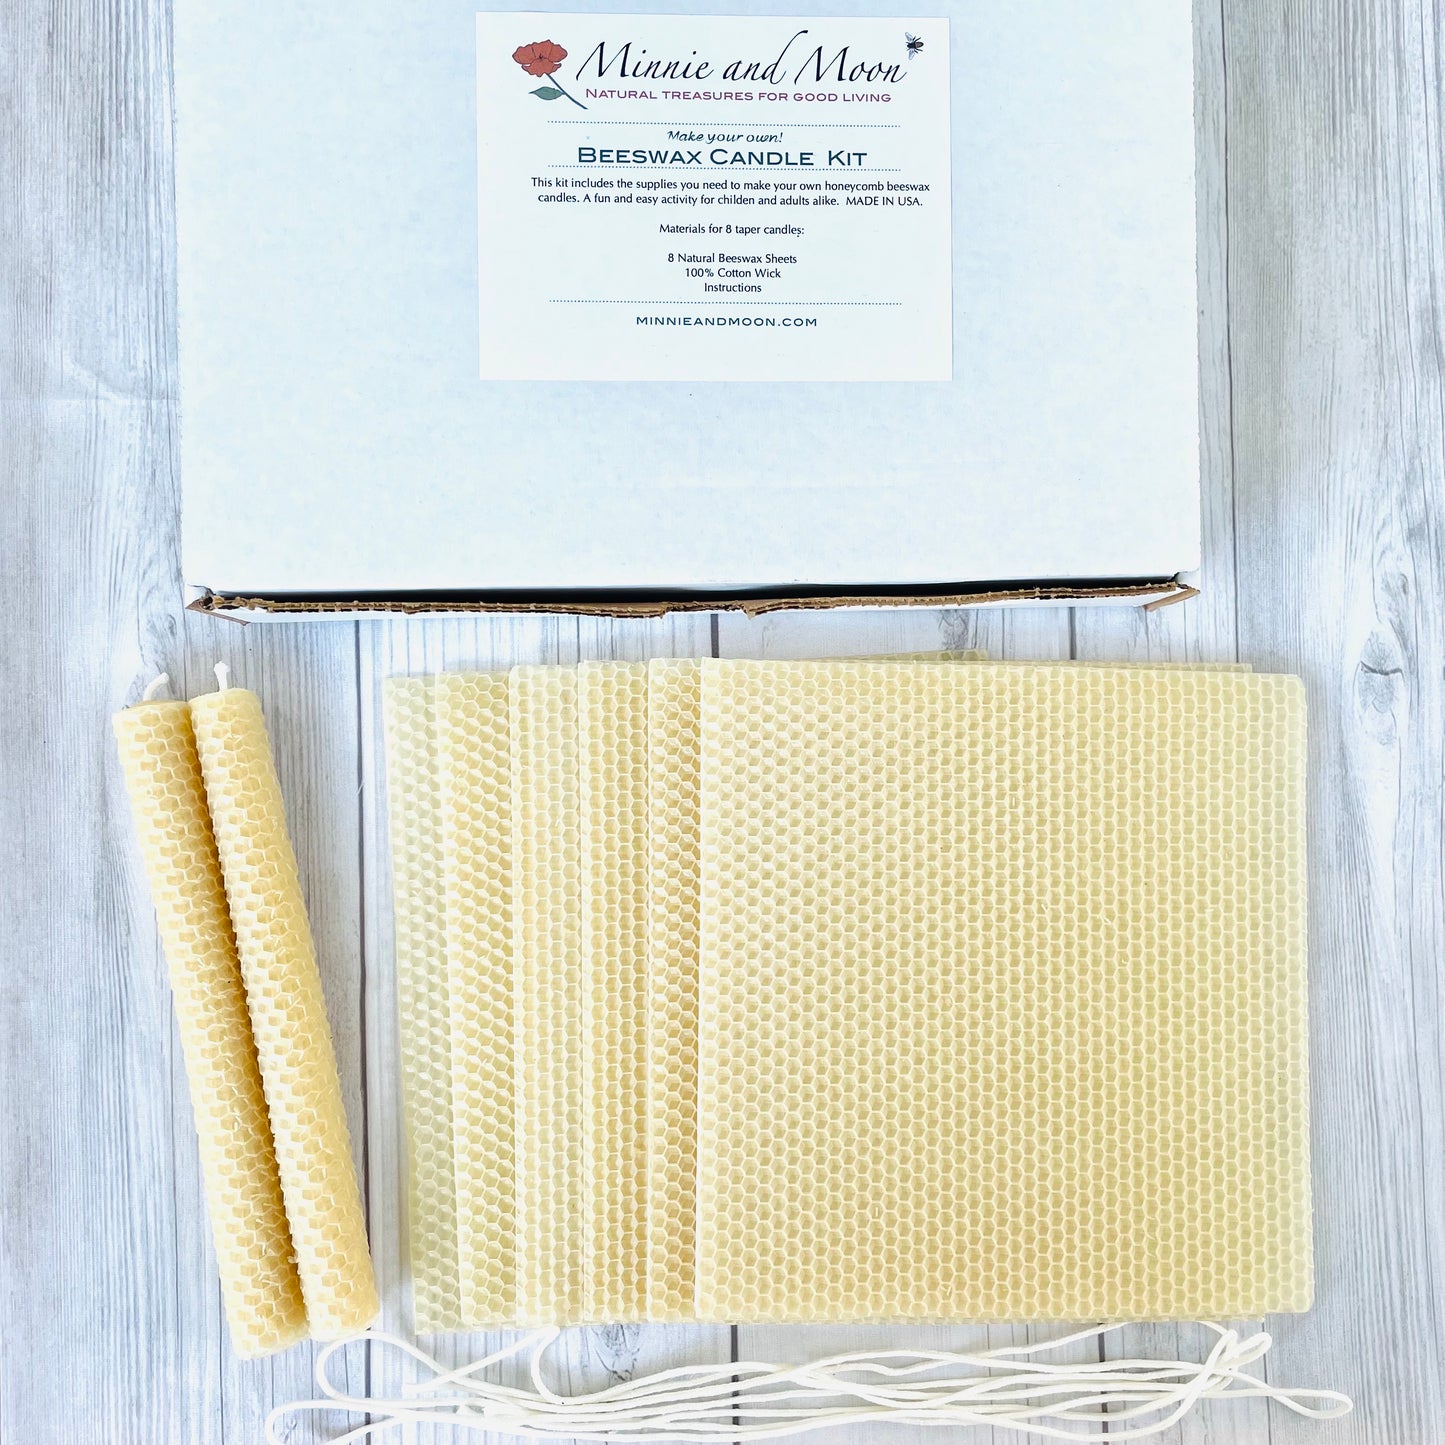 Make Your Own Beeswax Candles Kit